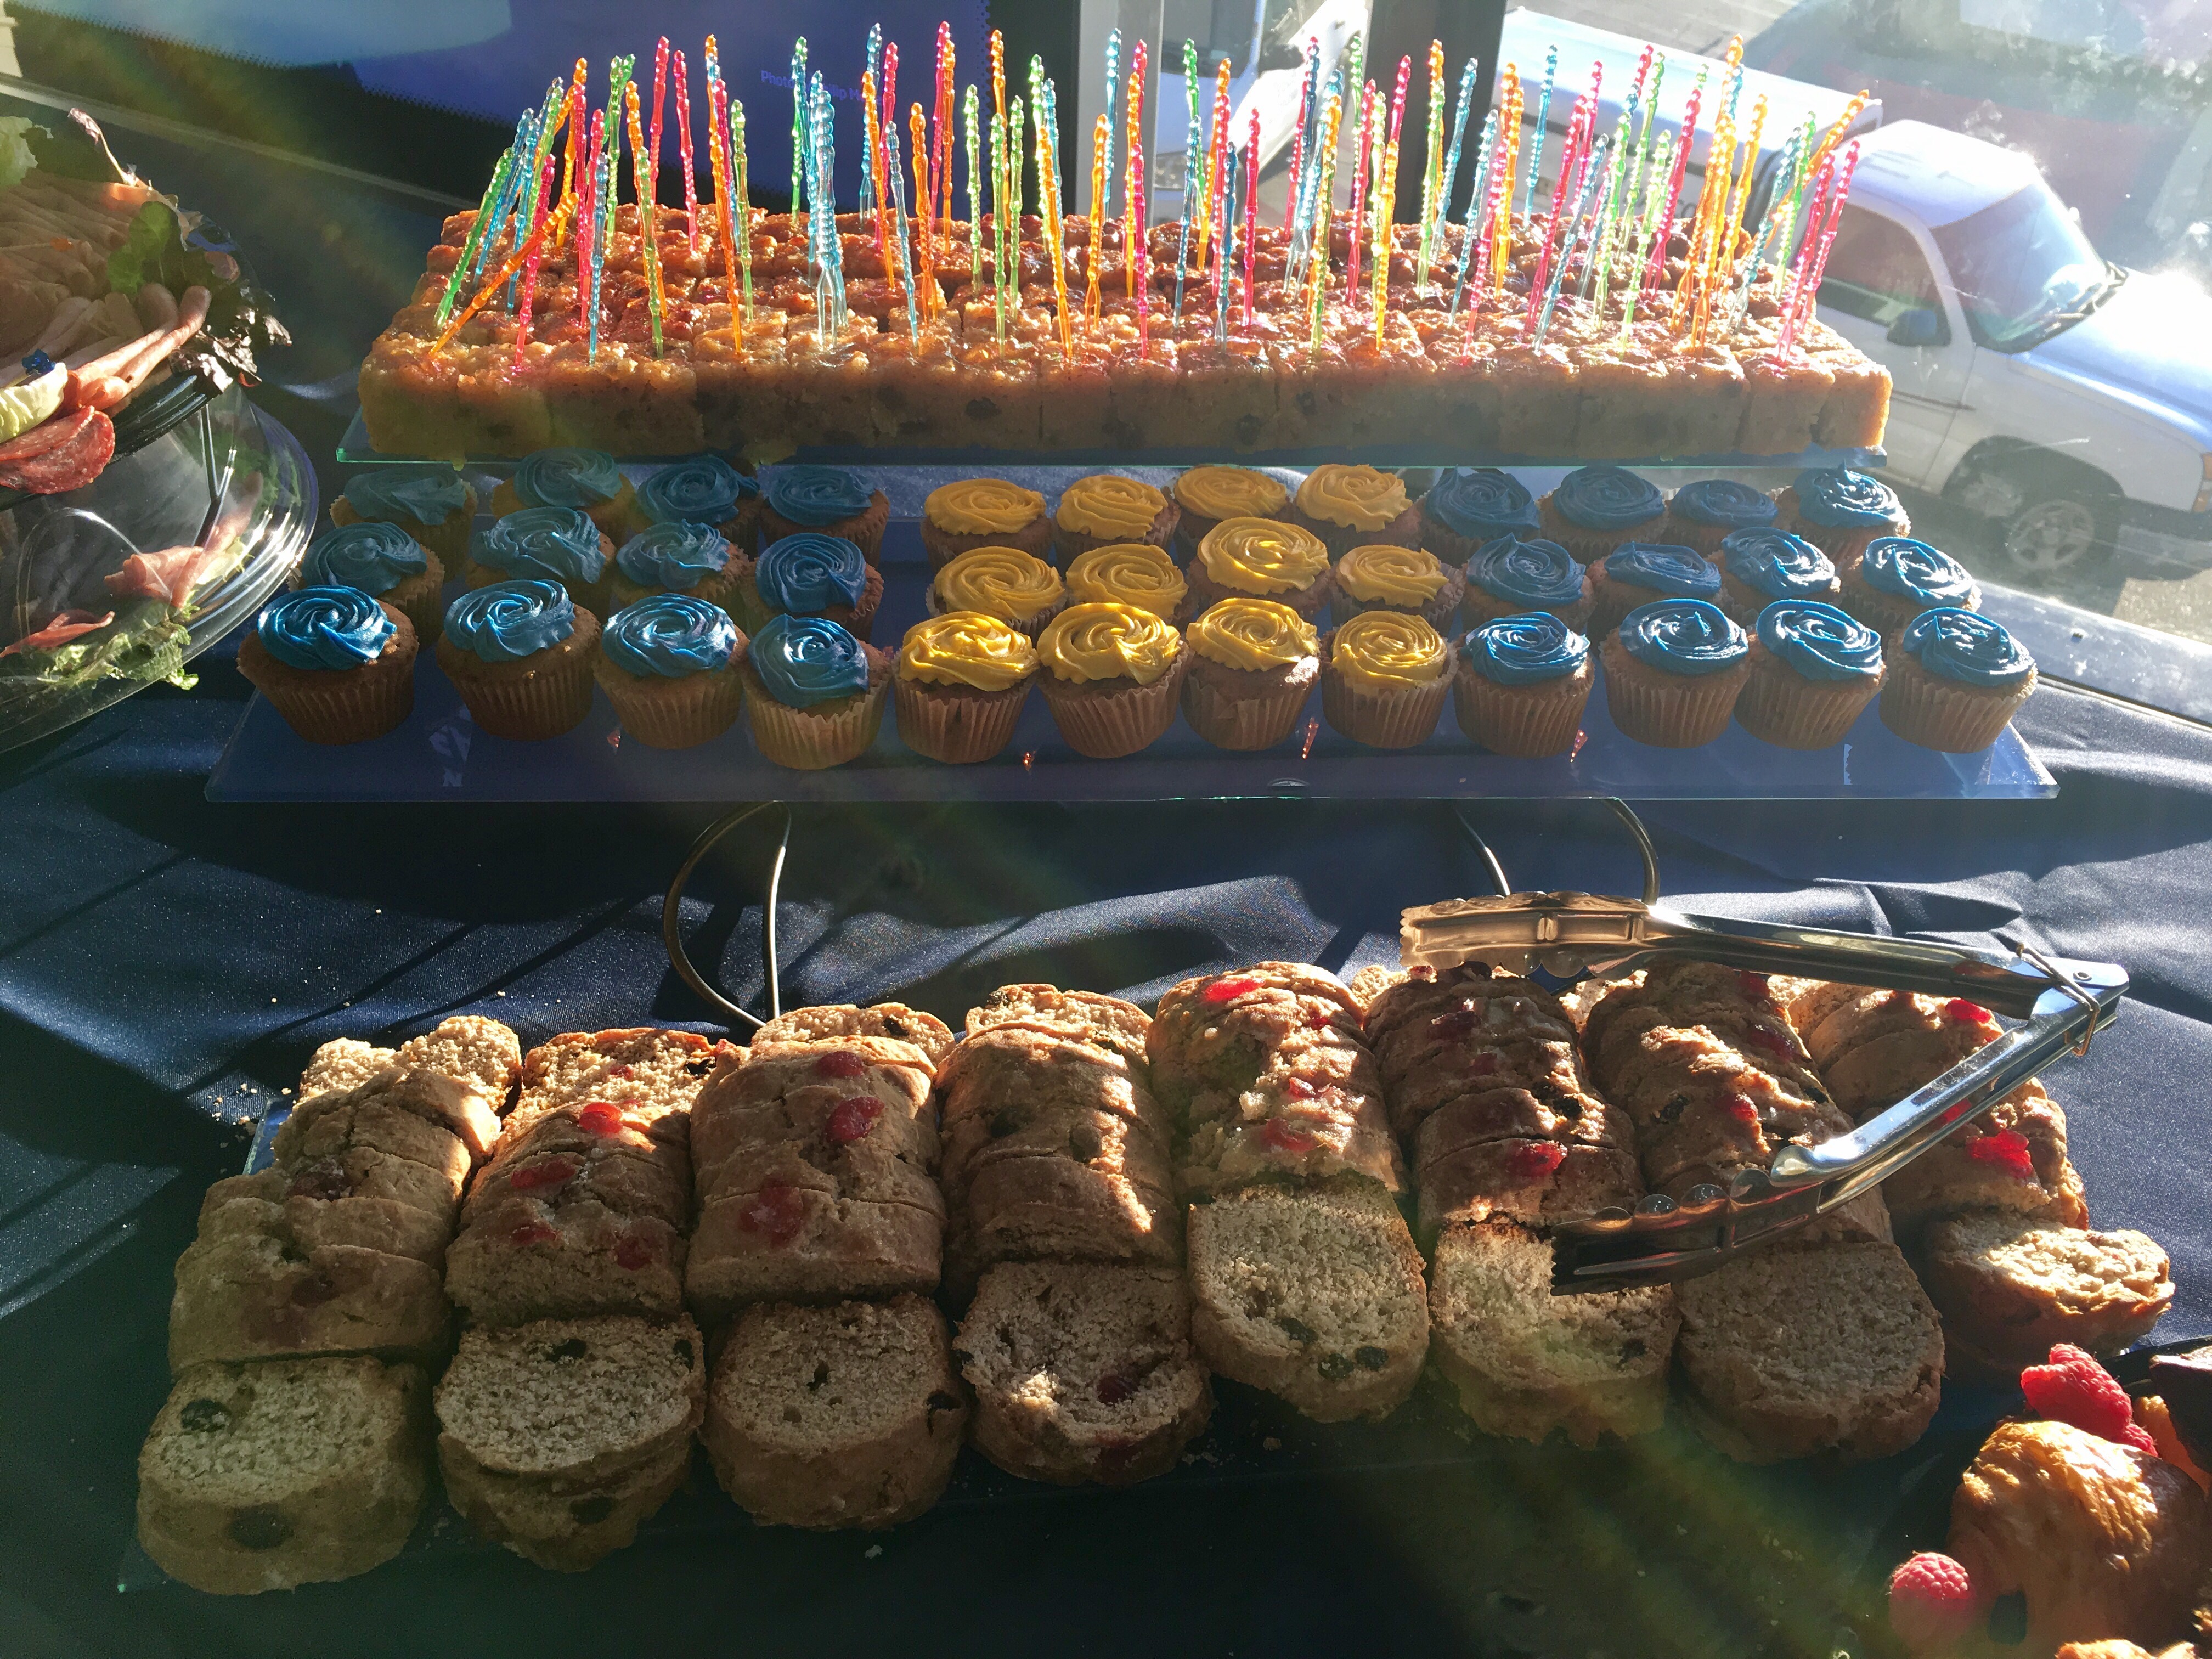 a display of cupcakes and cakes